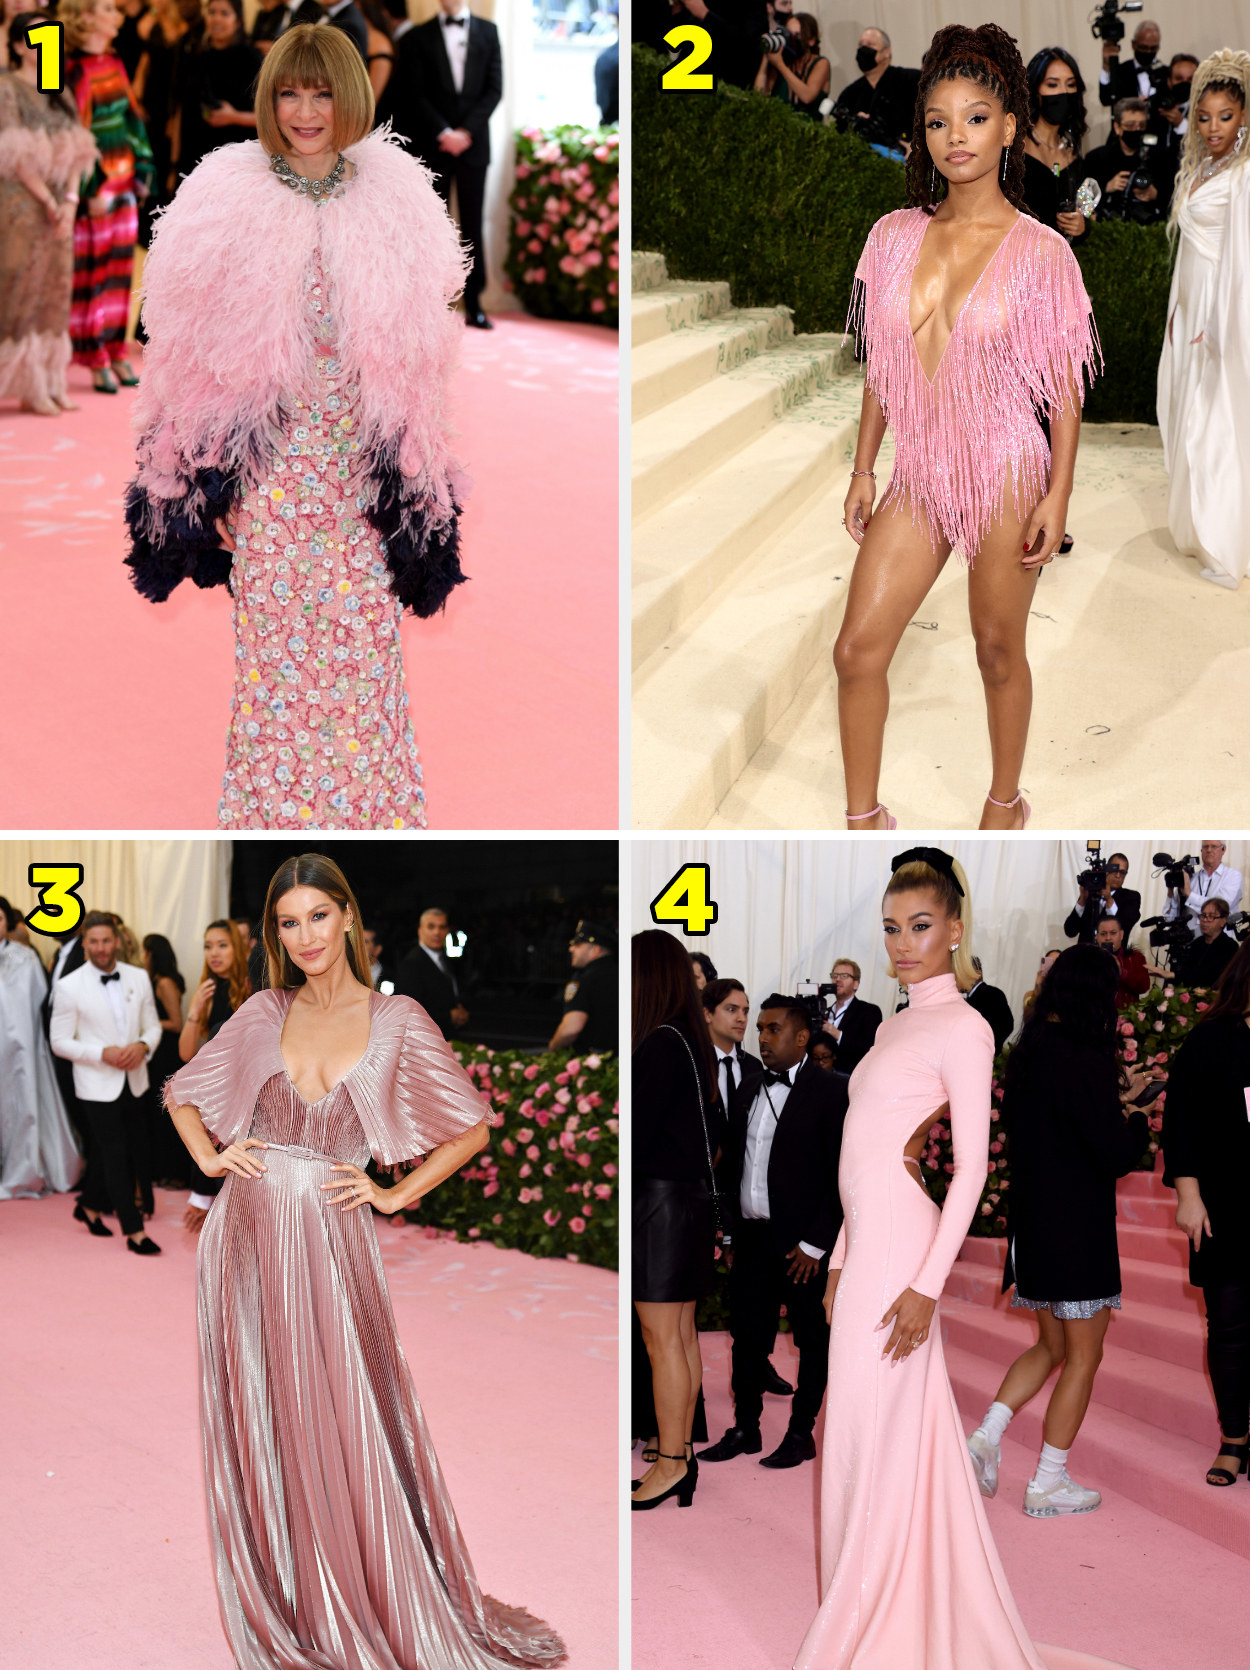 1. A floral gown with a feather coat on top. 2. A bodysuit made of fringe. 3. A pleated shortsleeved gown. 4. A turtleneck gown with a completely open back.